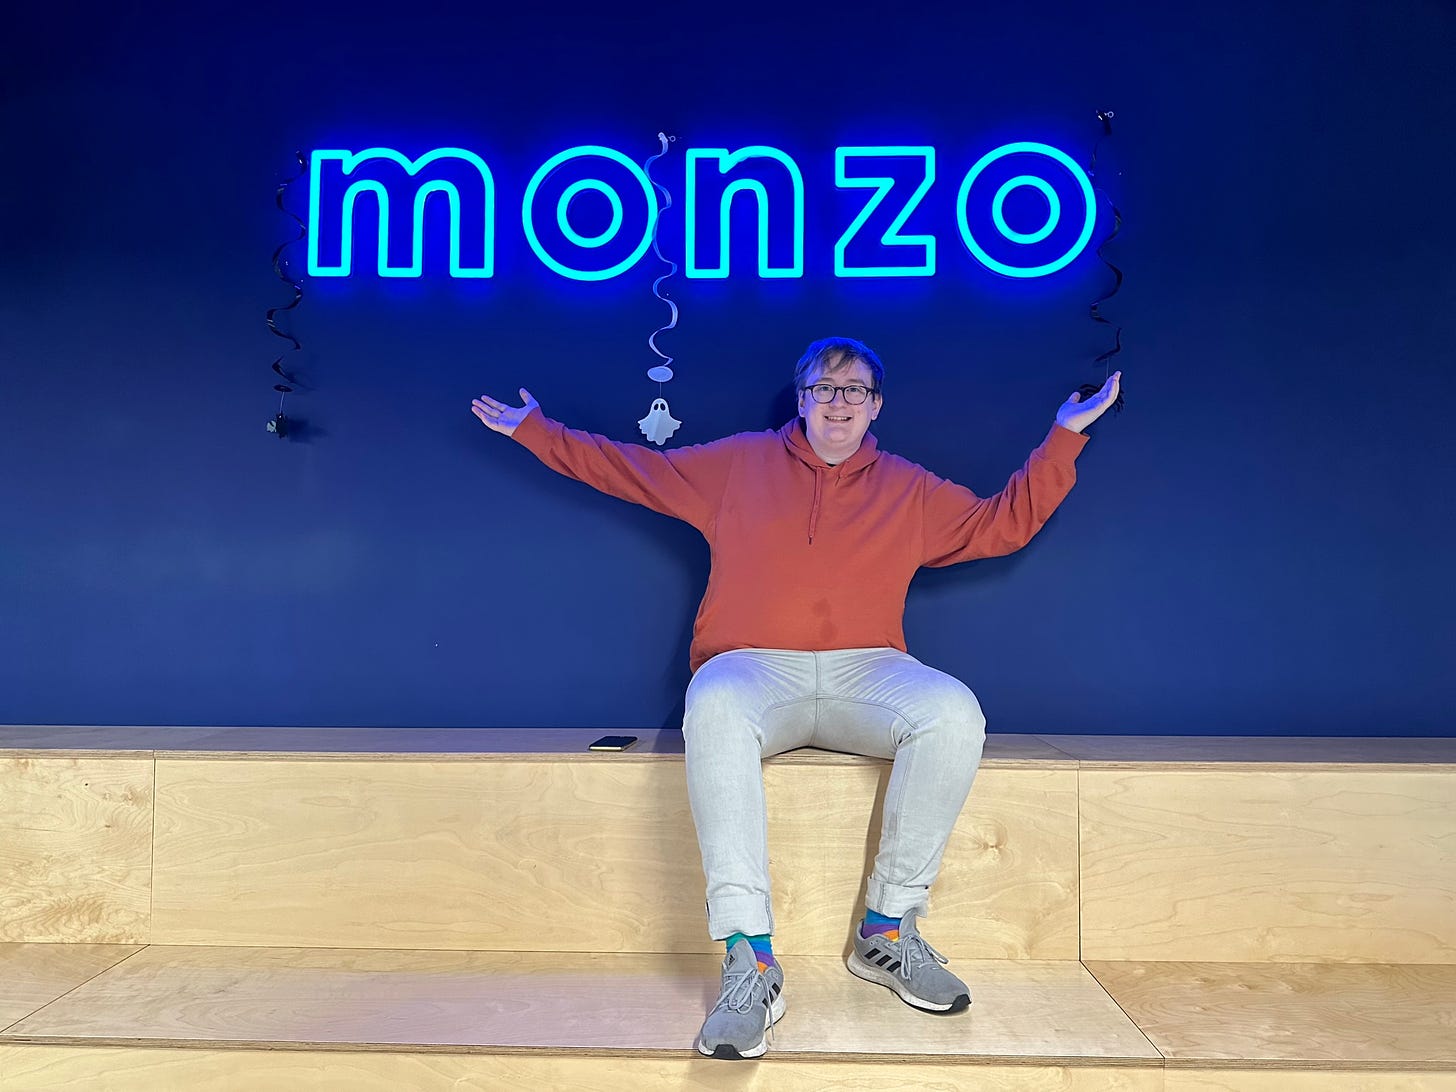 Avery is sitting down in an orange hoodie and light blue jeans, arms outstreached beneath a large neon Monzo logo. They're smiling to the camera.